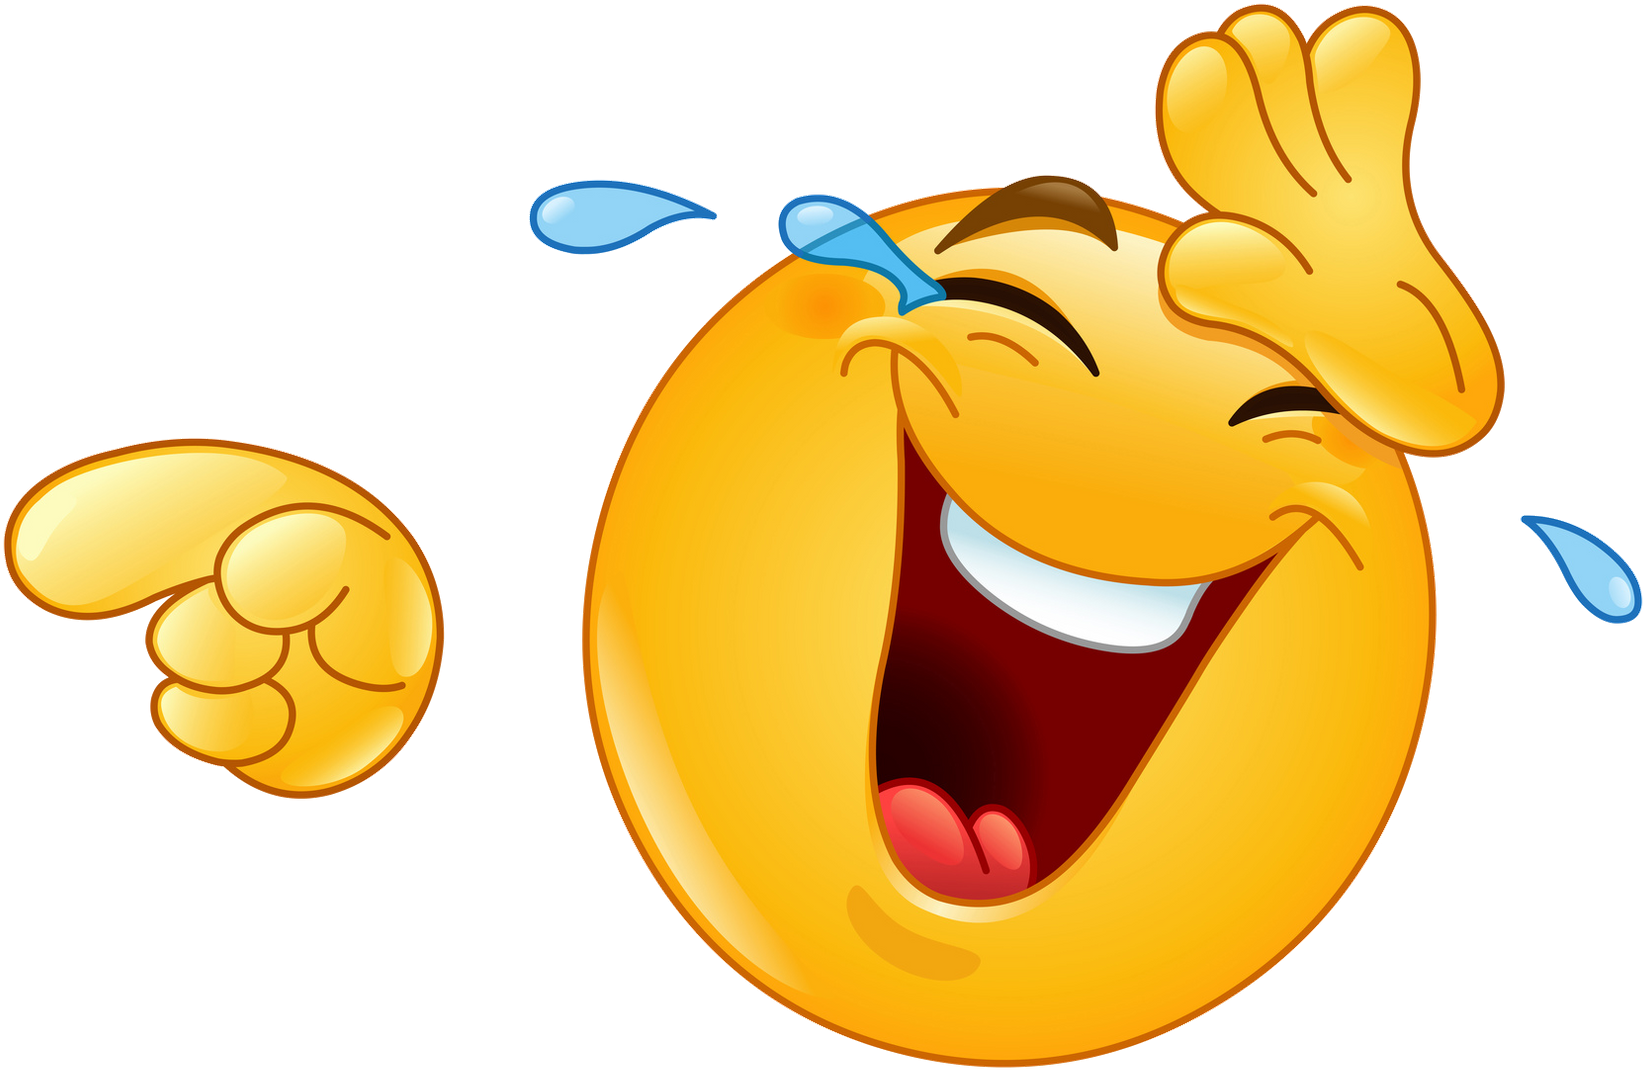 Download Smiley Lol Emoticon Laughter Clip Art Laughing Pointing